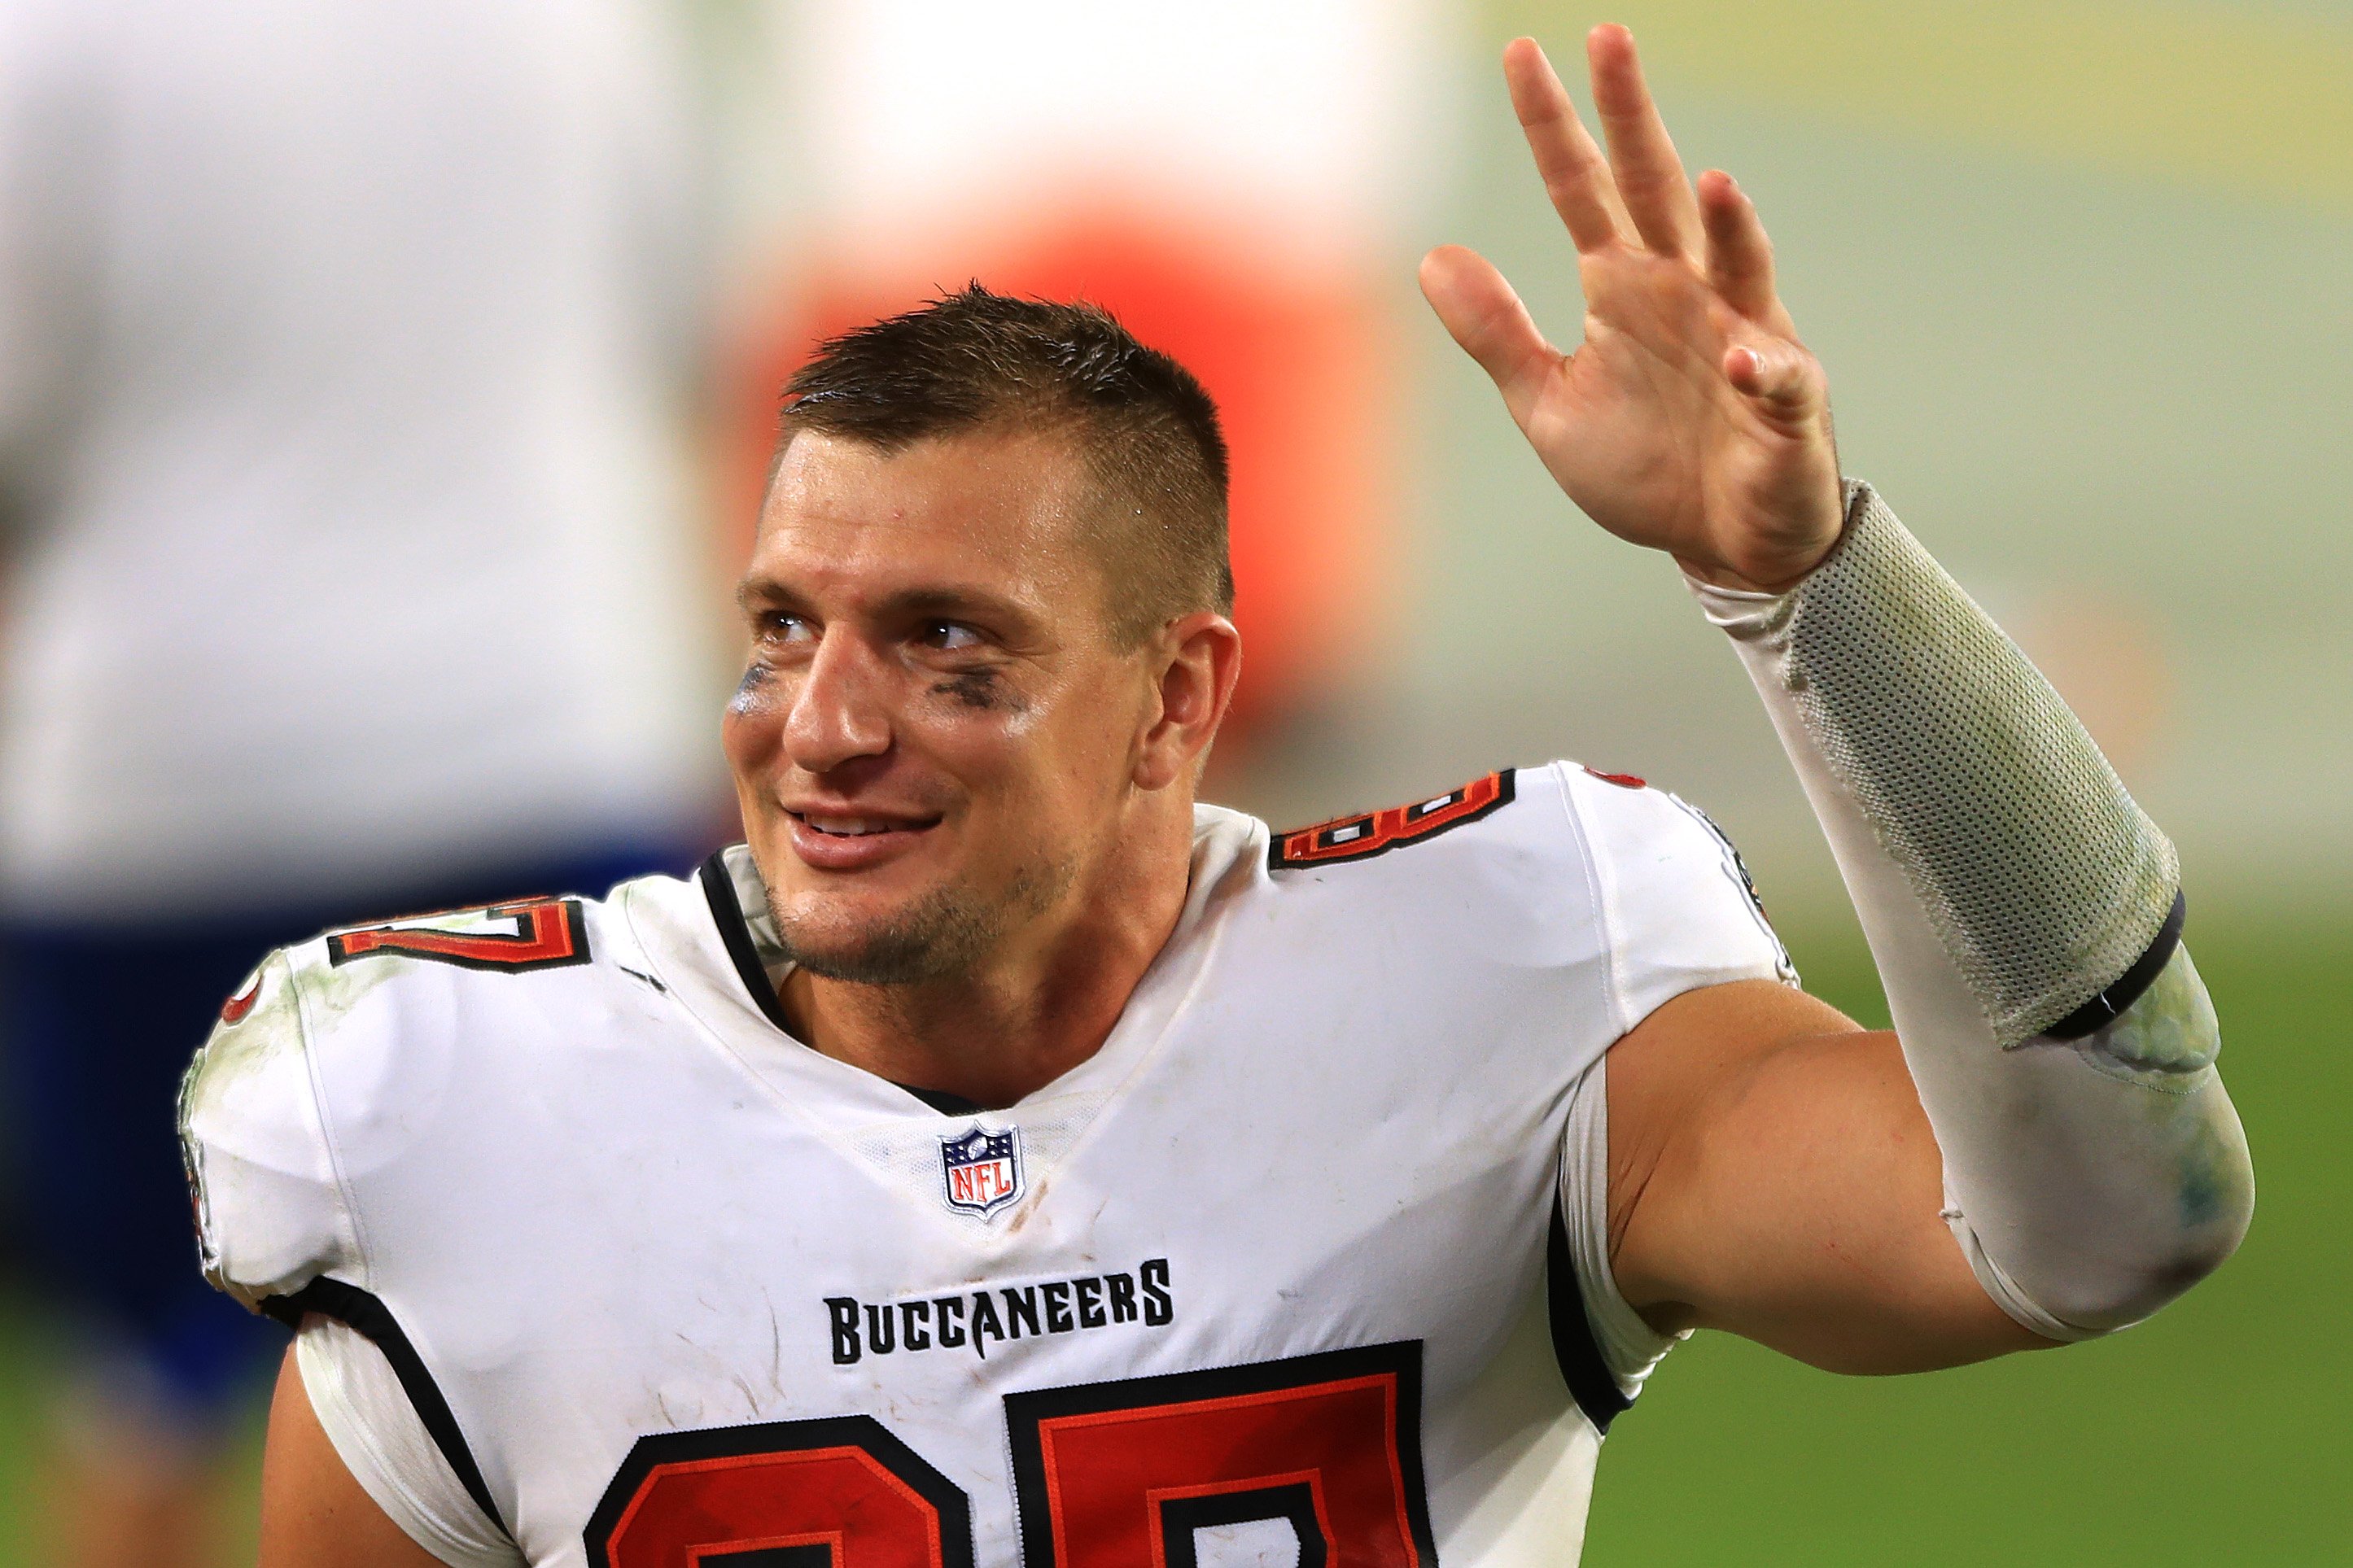 Why New England Patriots’ Rob Gronkowski Hasn’t Touched His NFL Salary